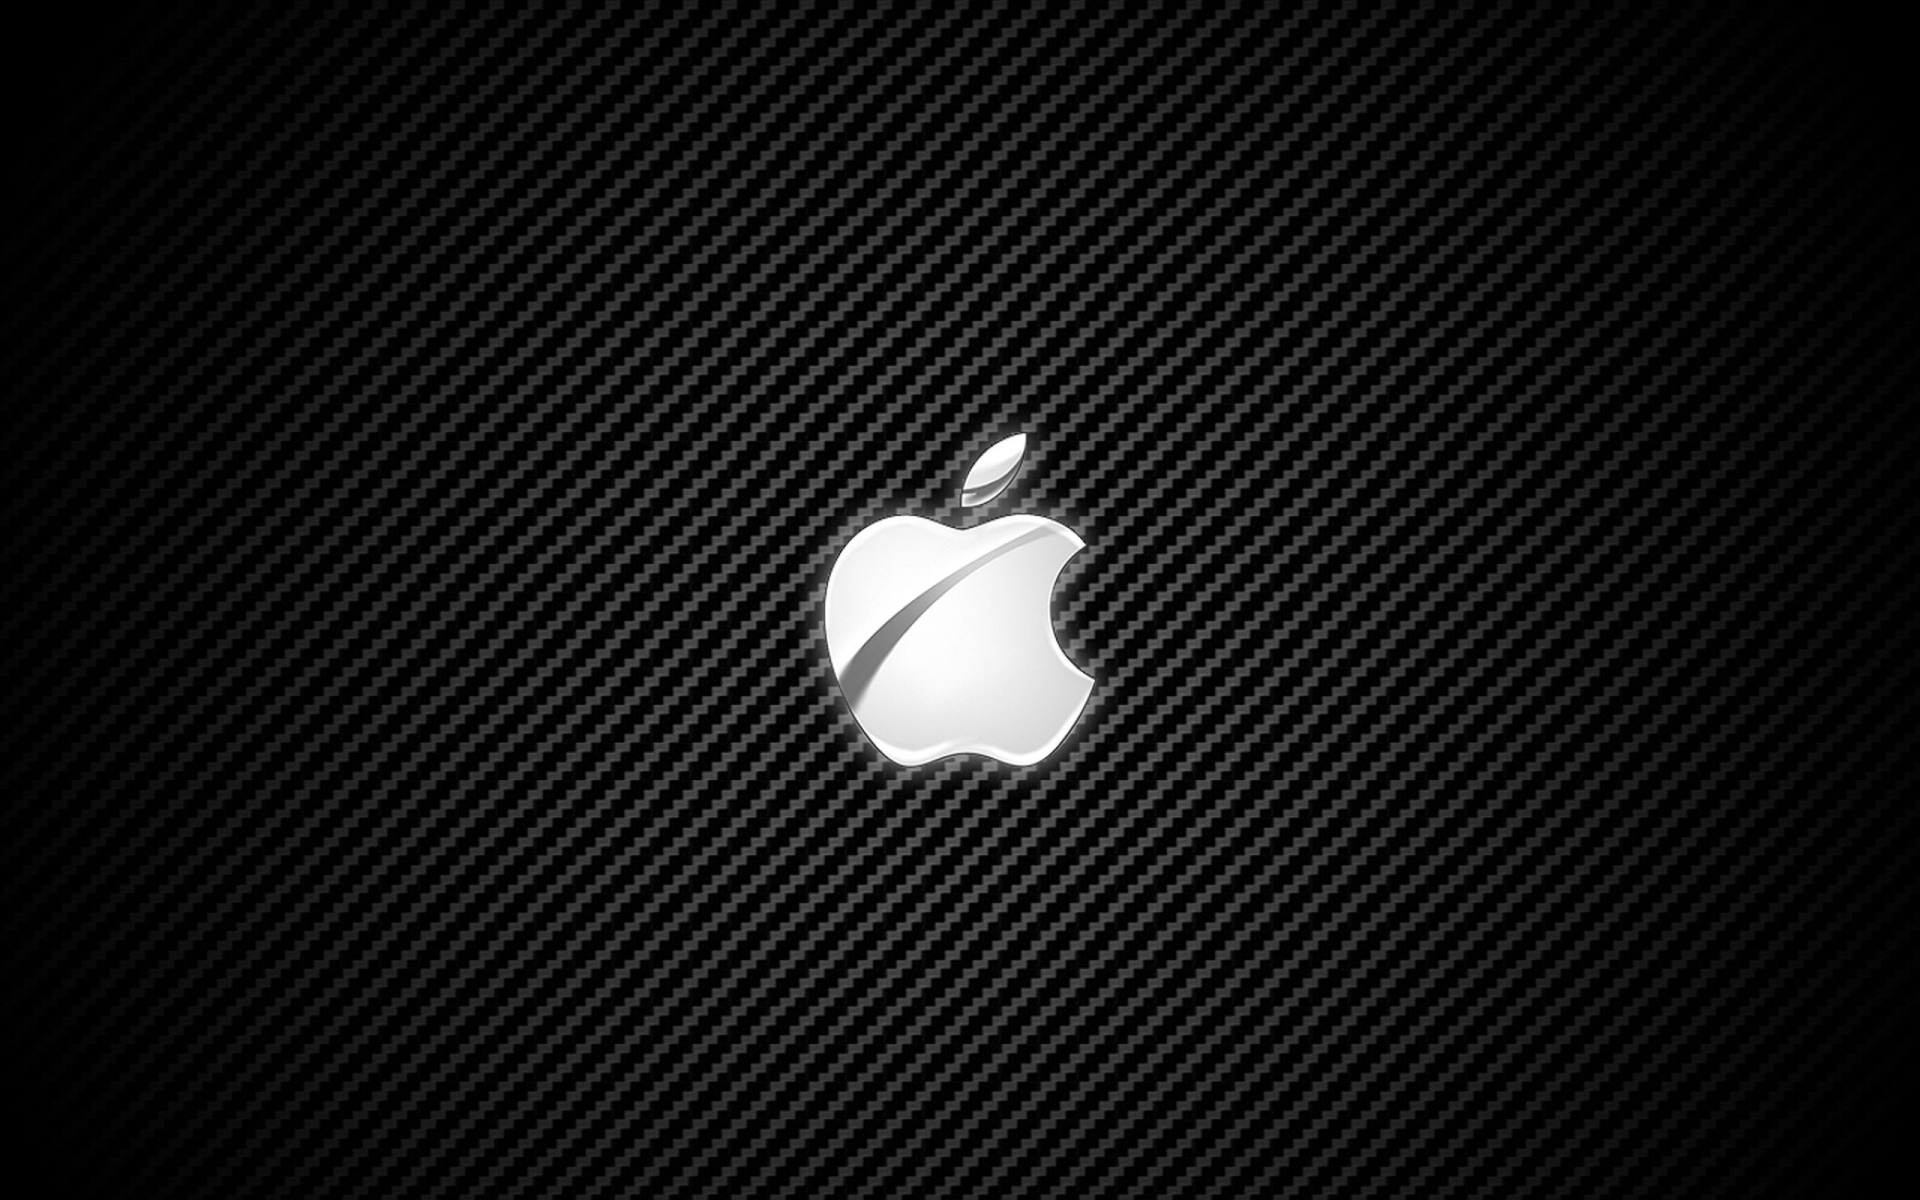 PC Wallpapers apple, brands, background, logos, black